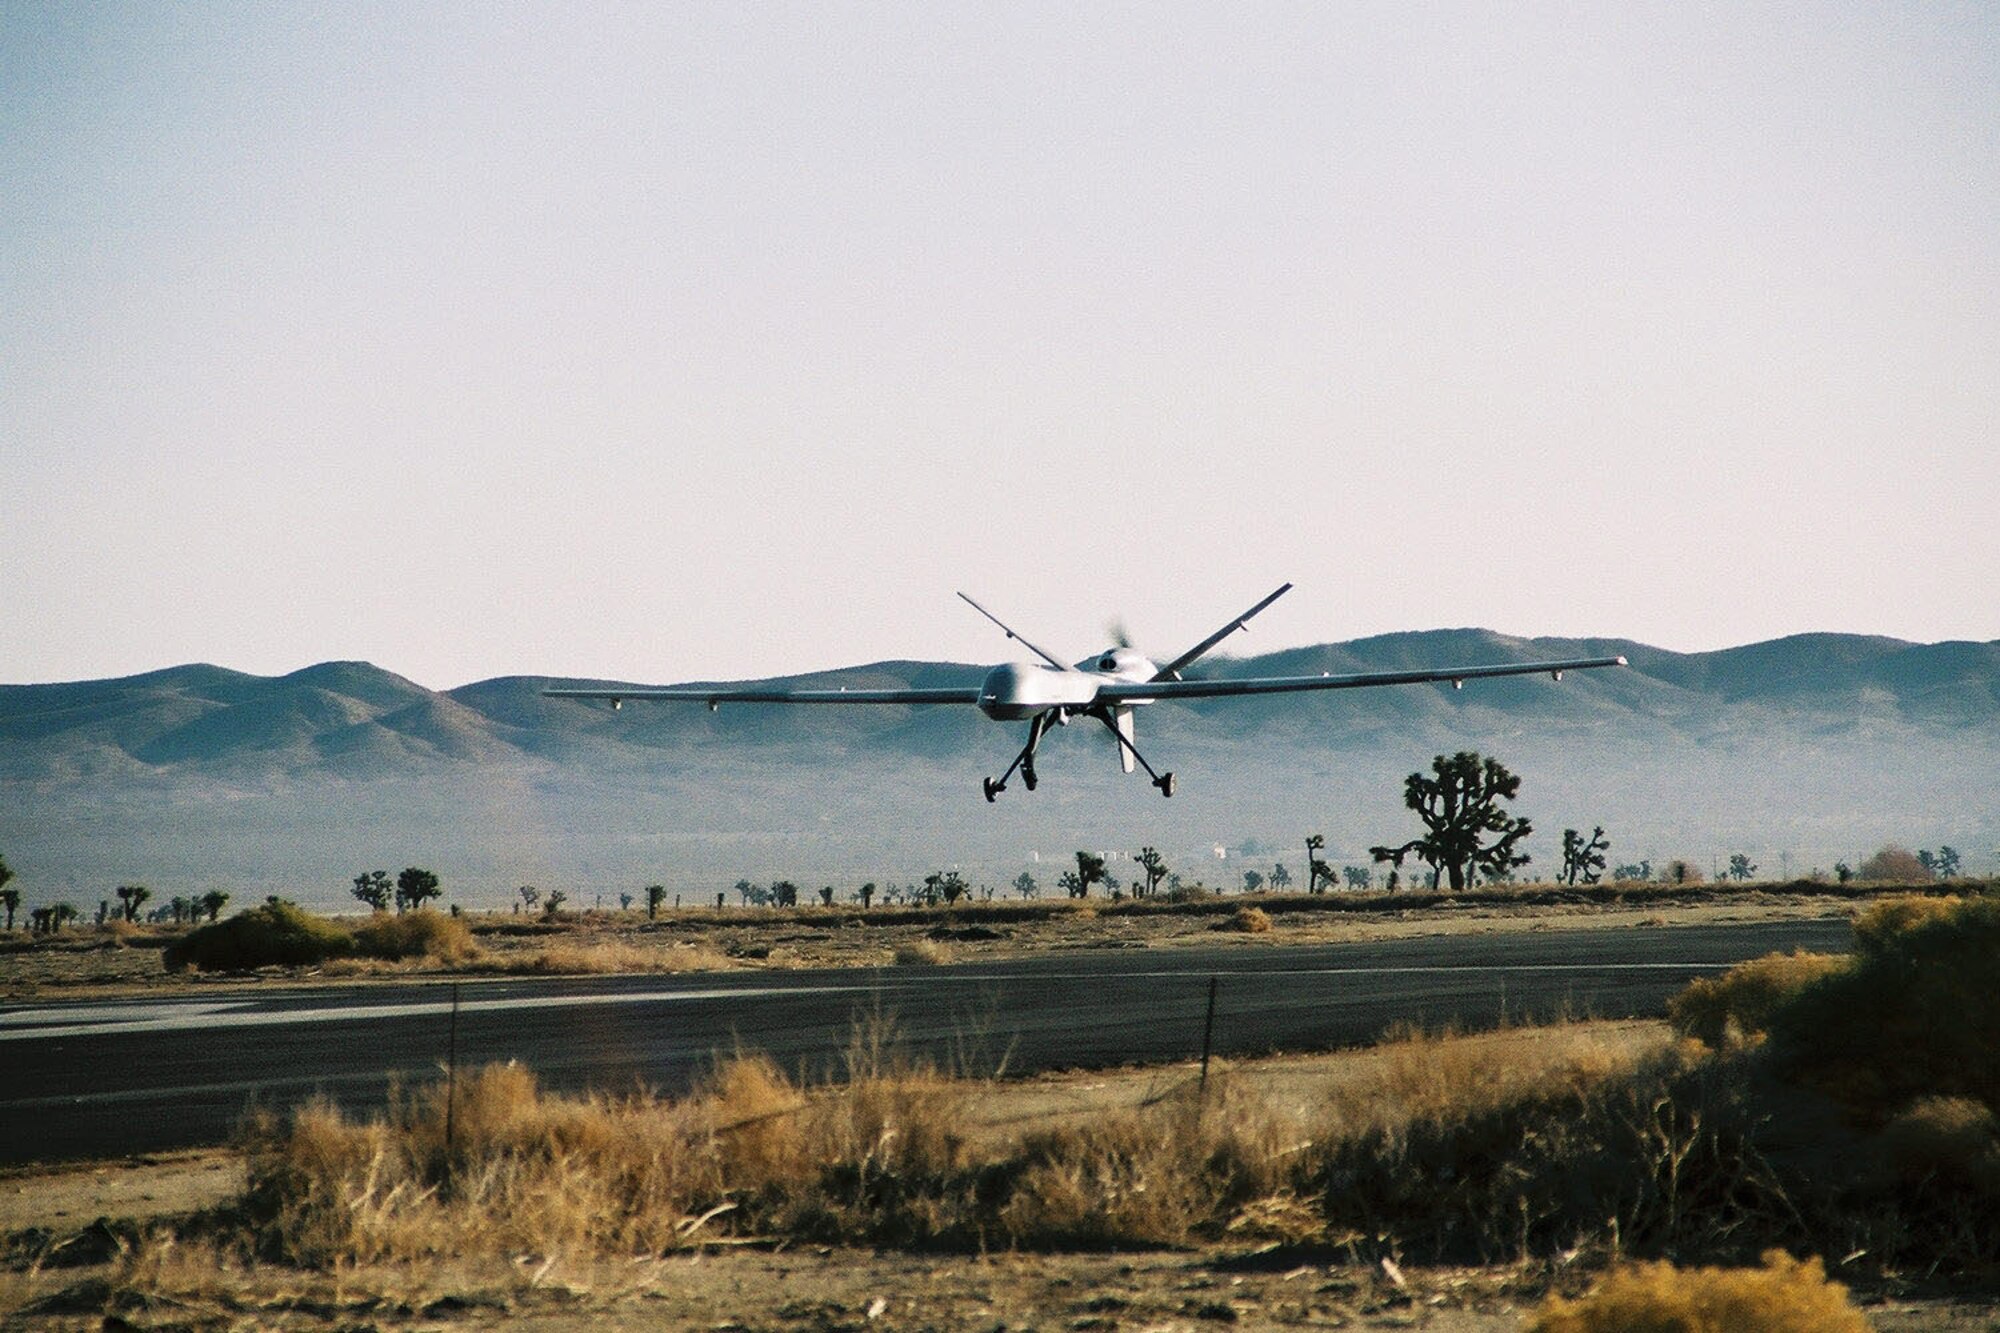 A Predator Unmanned Aerial Vehicle (left) lands at Gray Buttes-El Mirage test facility about 20 miles southeast of the base.  A Predator B UAV (right) flies over the Mojave Desert. The Predator A and B weapons systems are undergoing developmental test and evaluation by the newly-formed Detachment 1 of the 452nd Flight Test Squadron.  (Courtesy photos)

